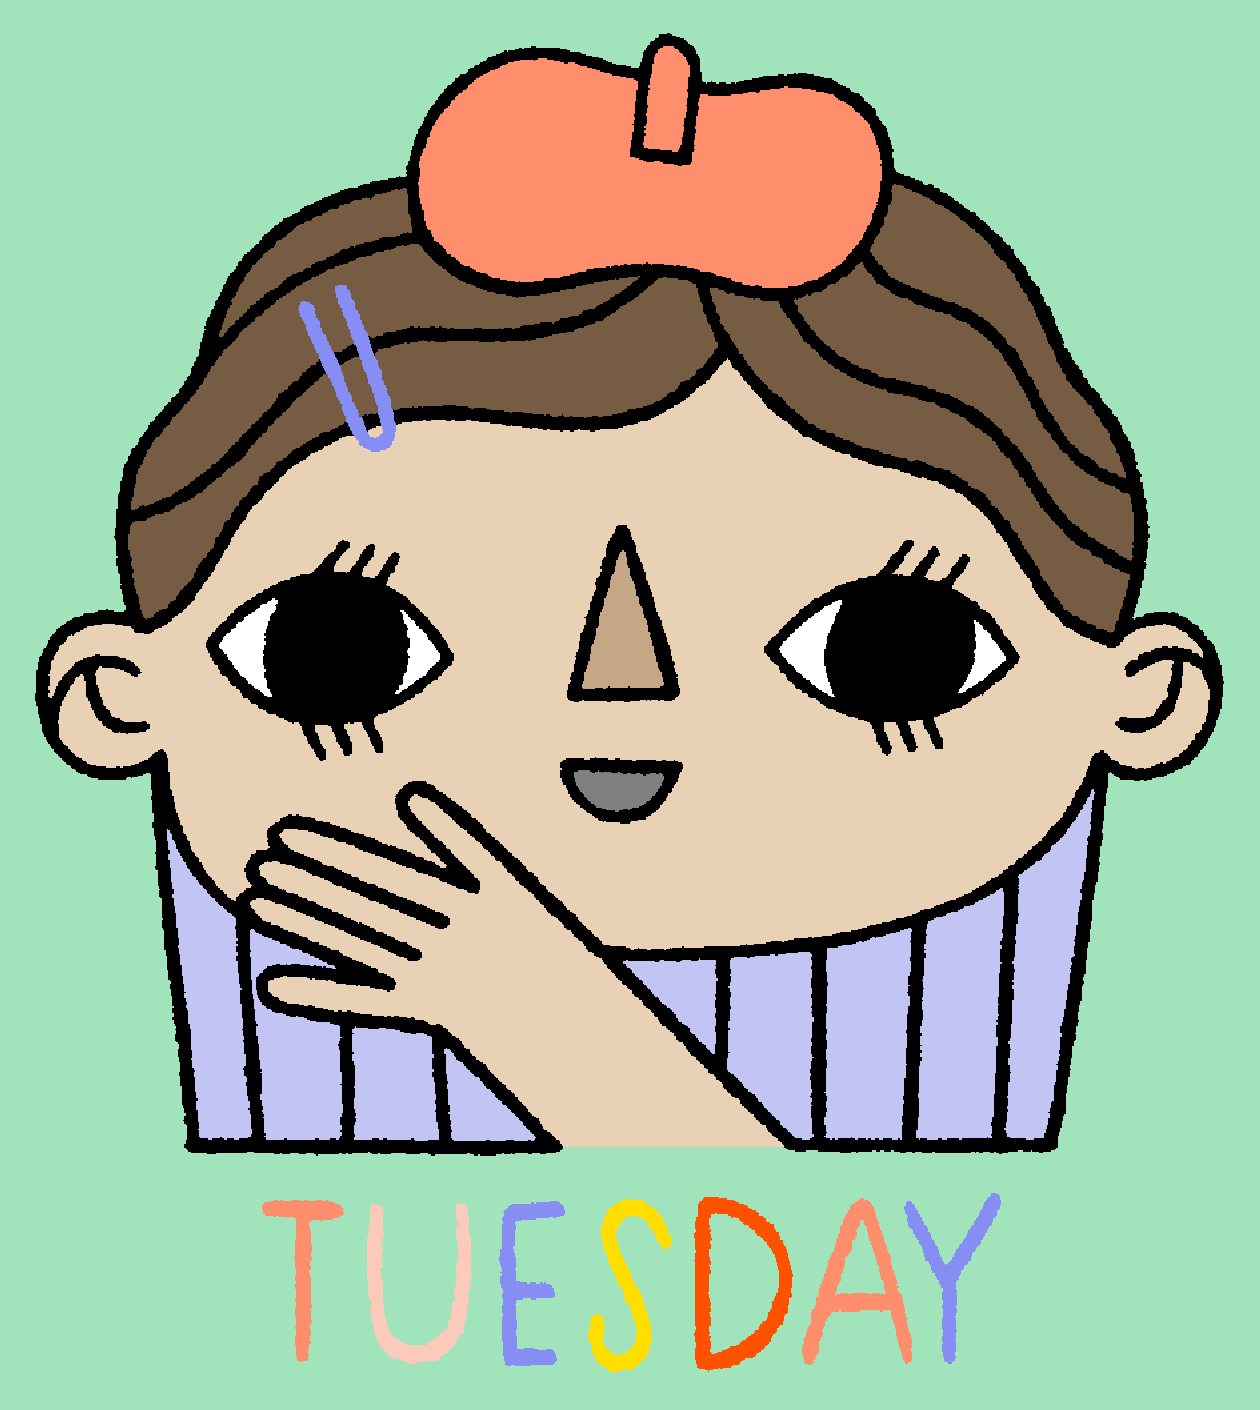 Illustrated gif. A young woman has her hand to her mouth and smiles at us with long lashes. Text, "Tuesday."